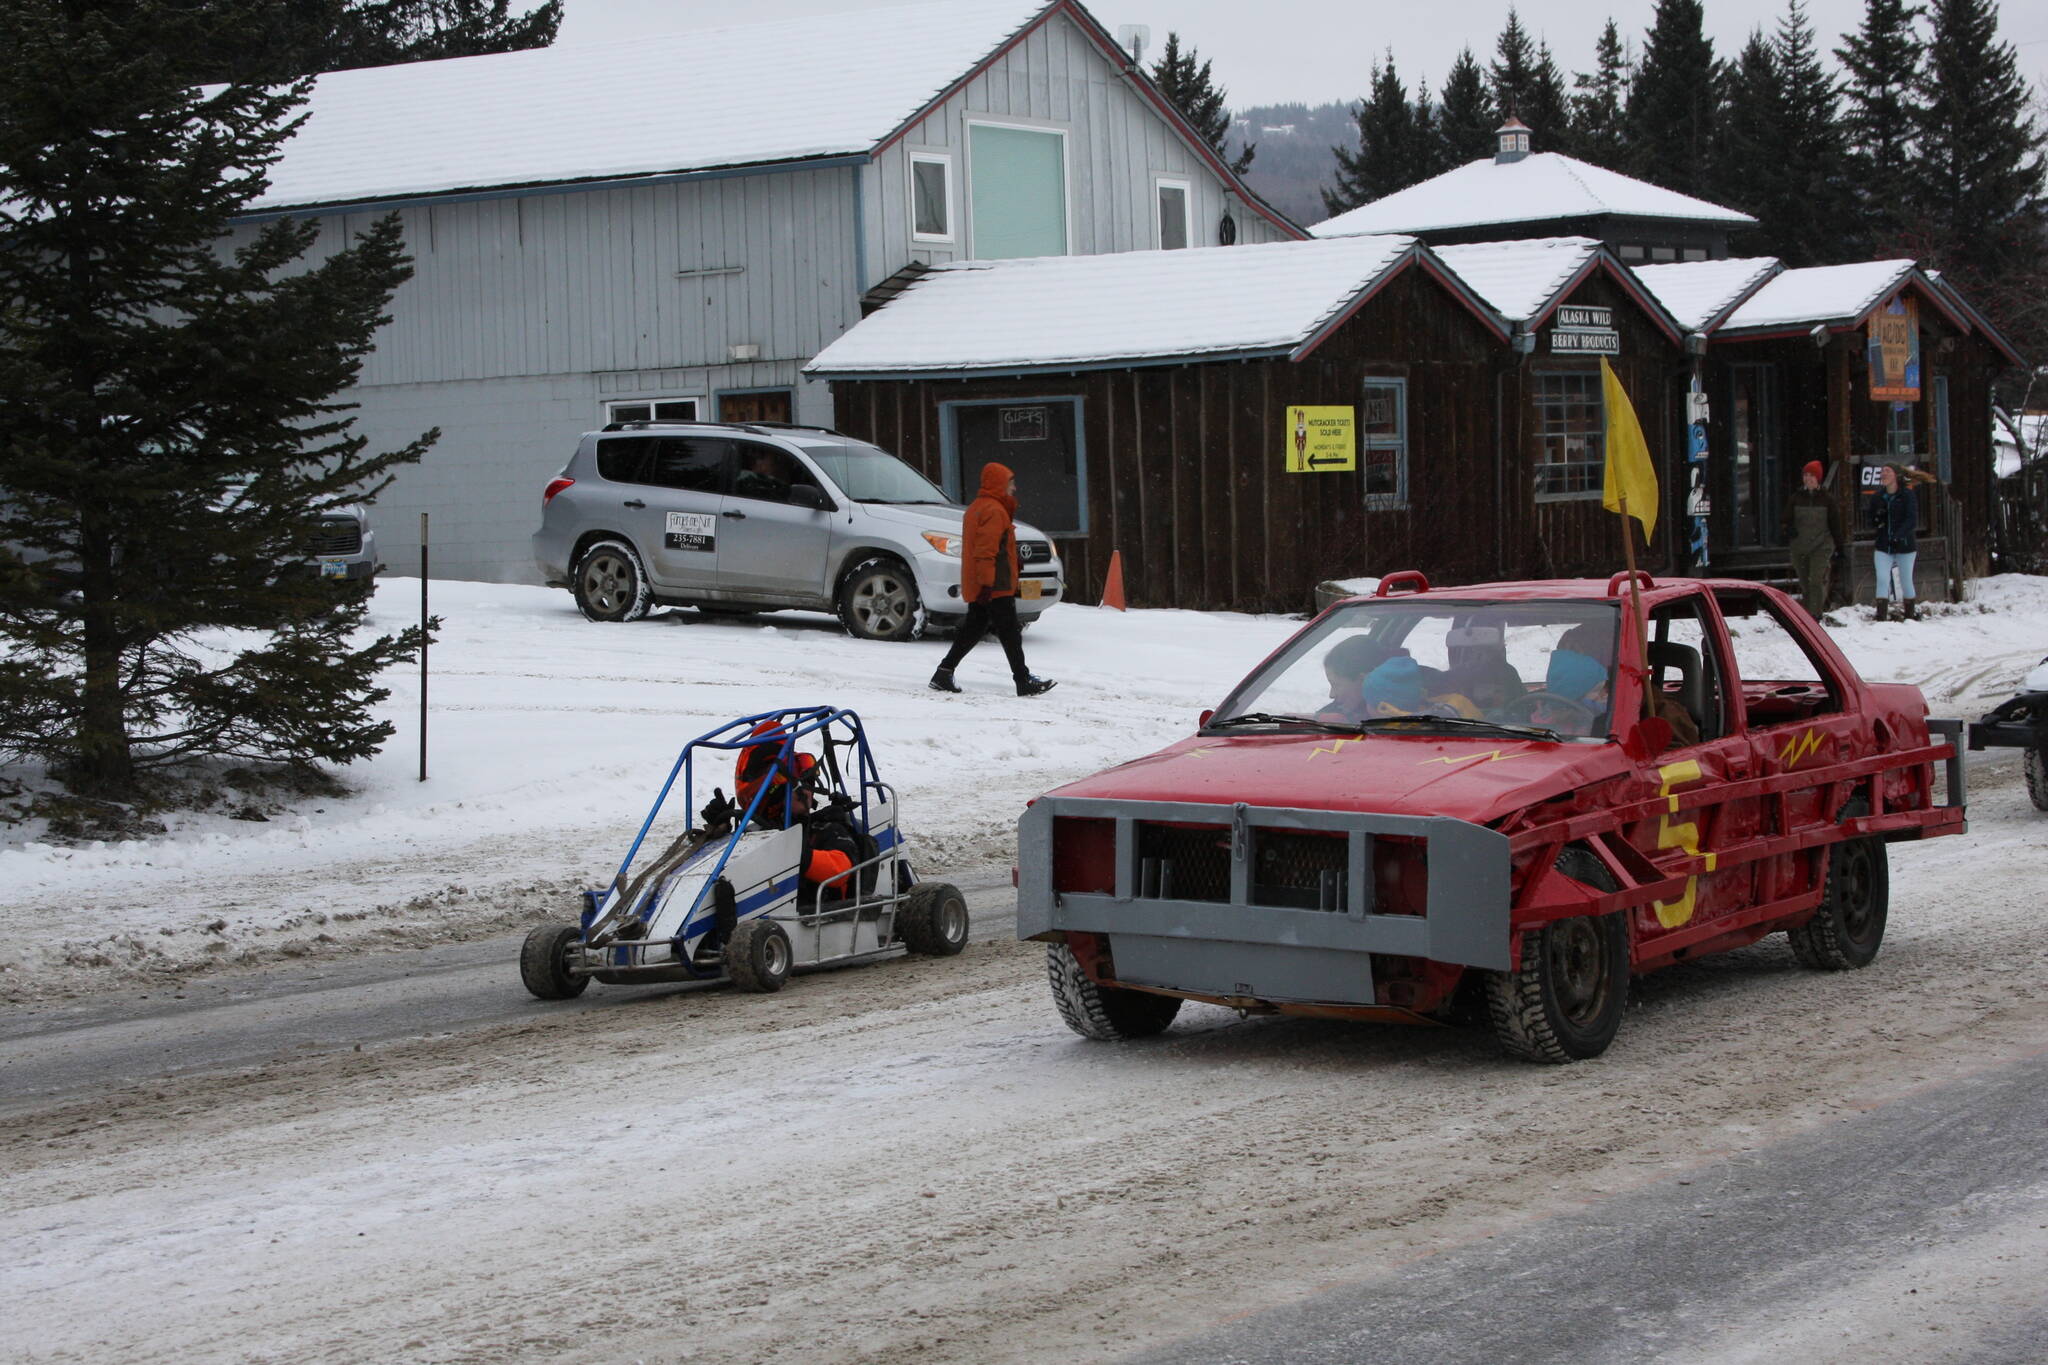 Drivers in the Homer Racing Association rumble down Pioneer Avenue in the 69th annual Winter Carnival Parade on Saturday, Feb. 11, 2023 in Homer, Alaska. Photo by Delcenia Cosman